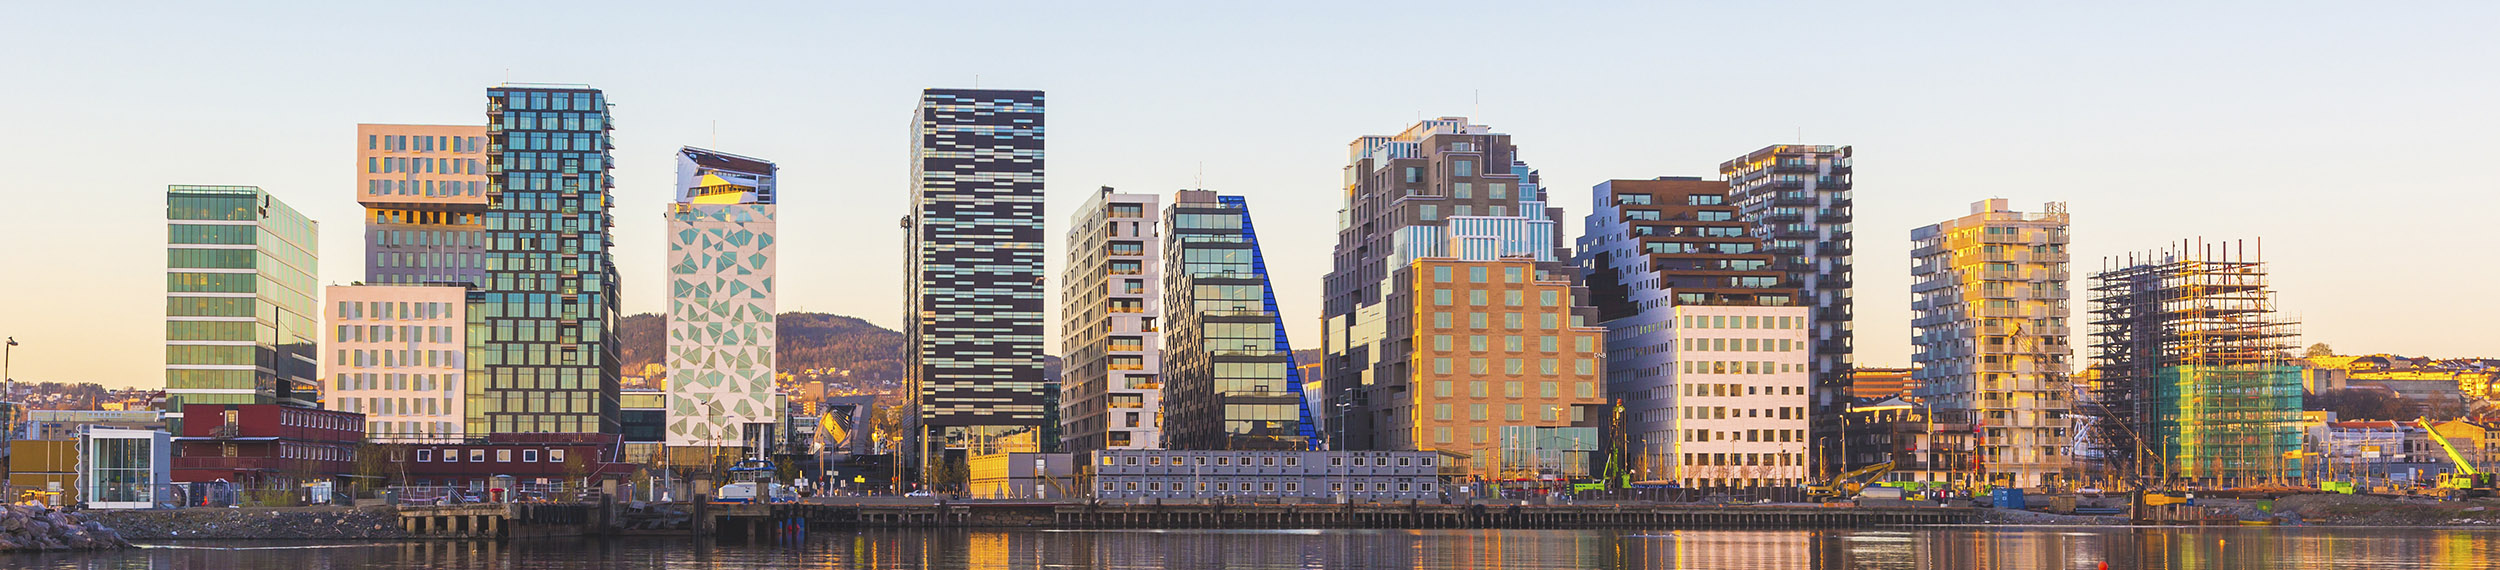 View of modern Oslo buildings, reflecting off the water at sunrise.